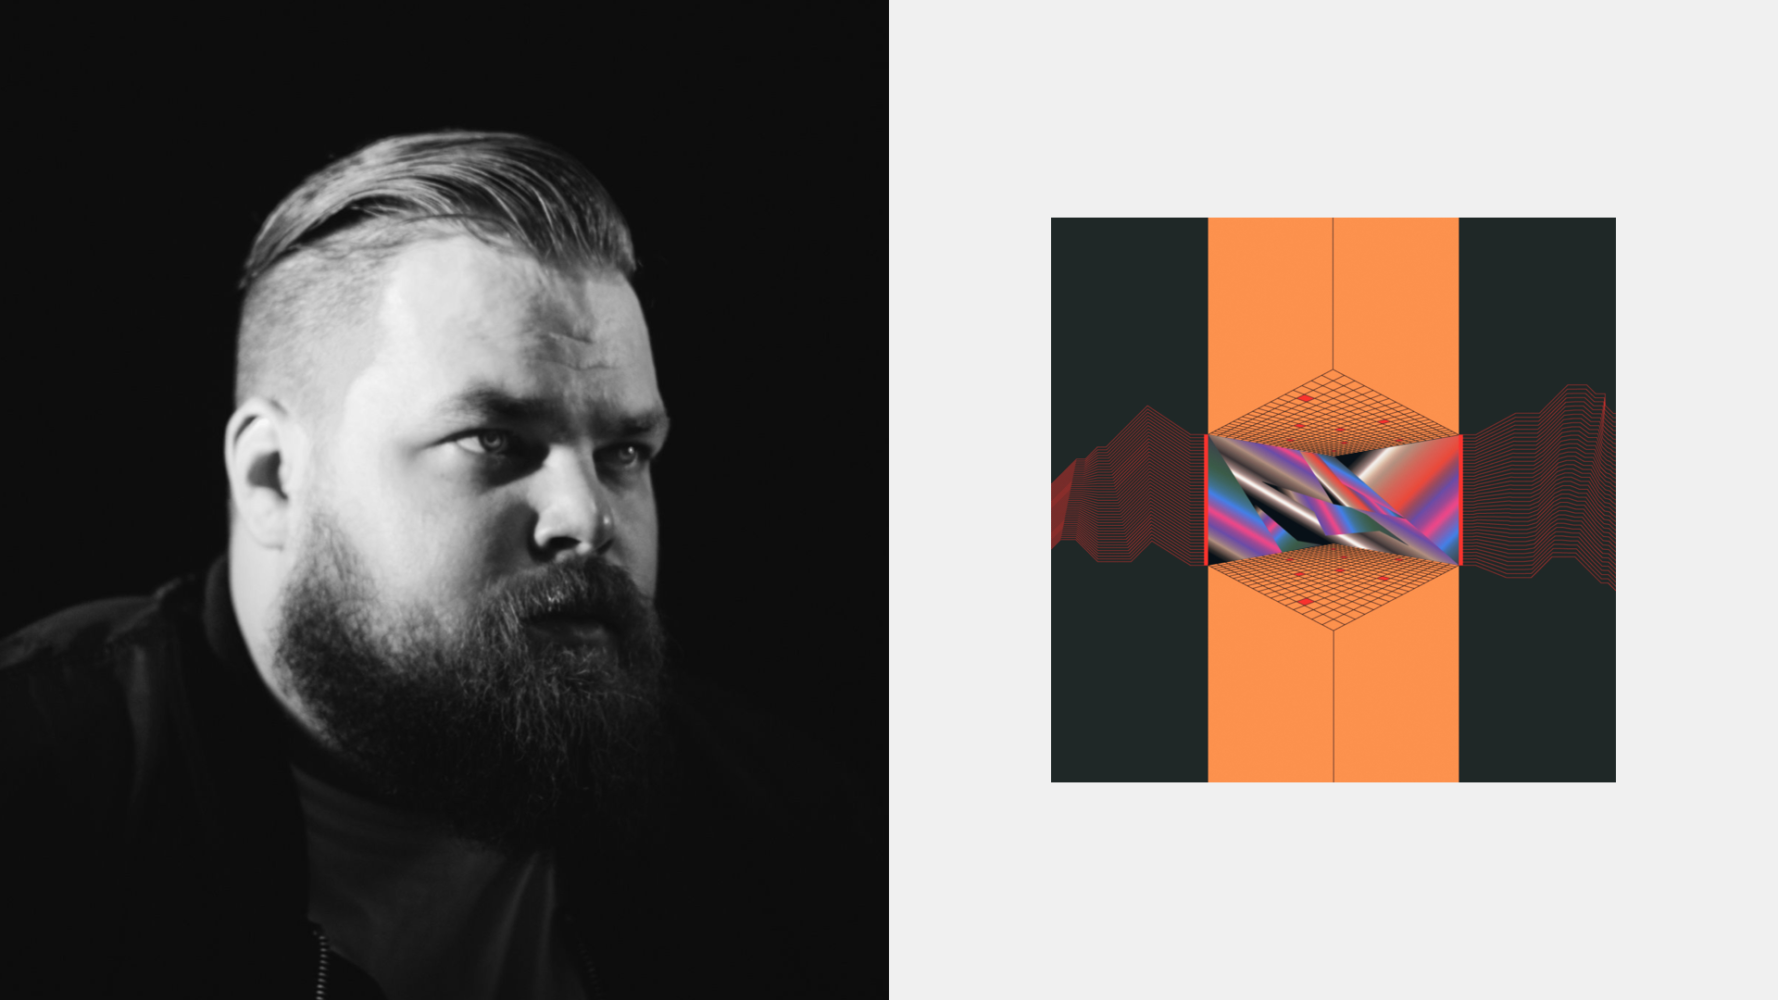 Friday Giveaway – Humint Song File by Com Truise